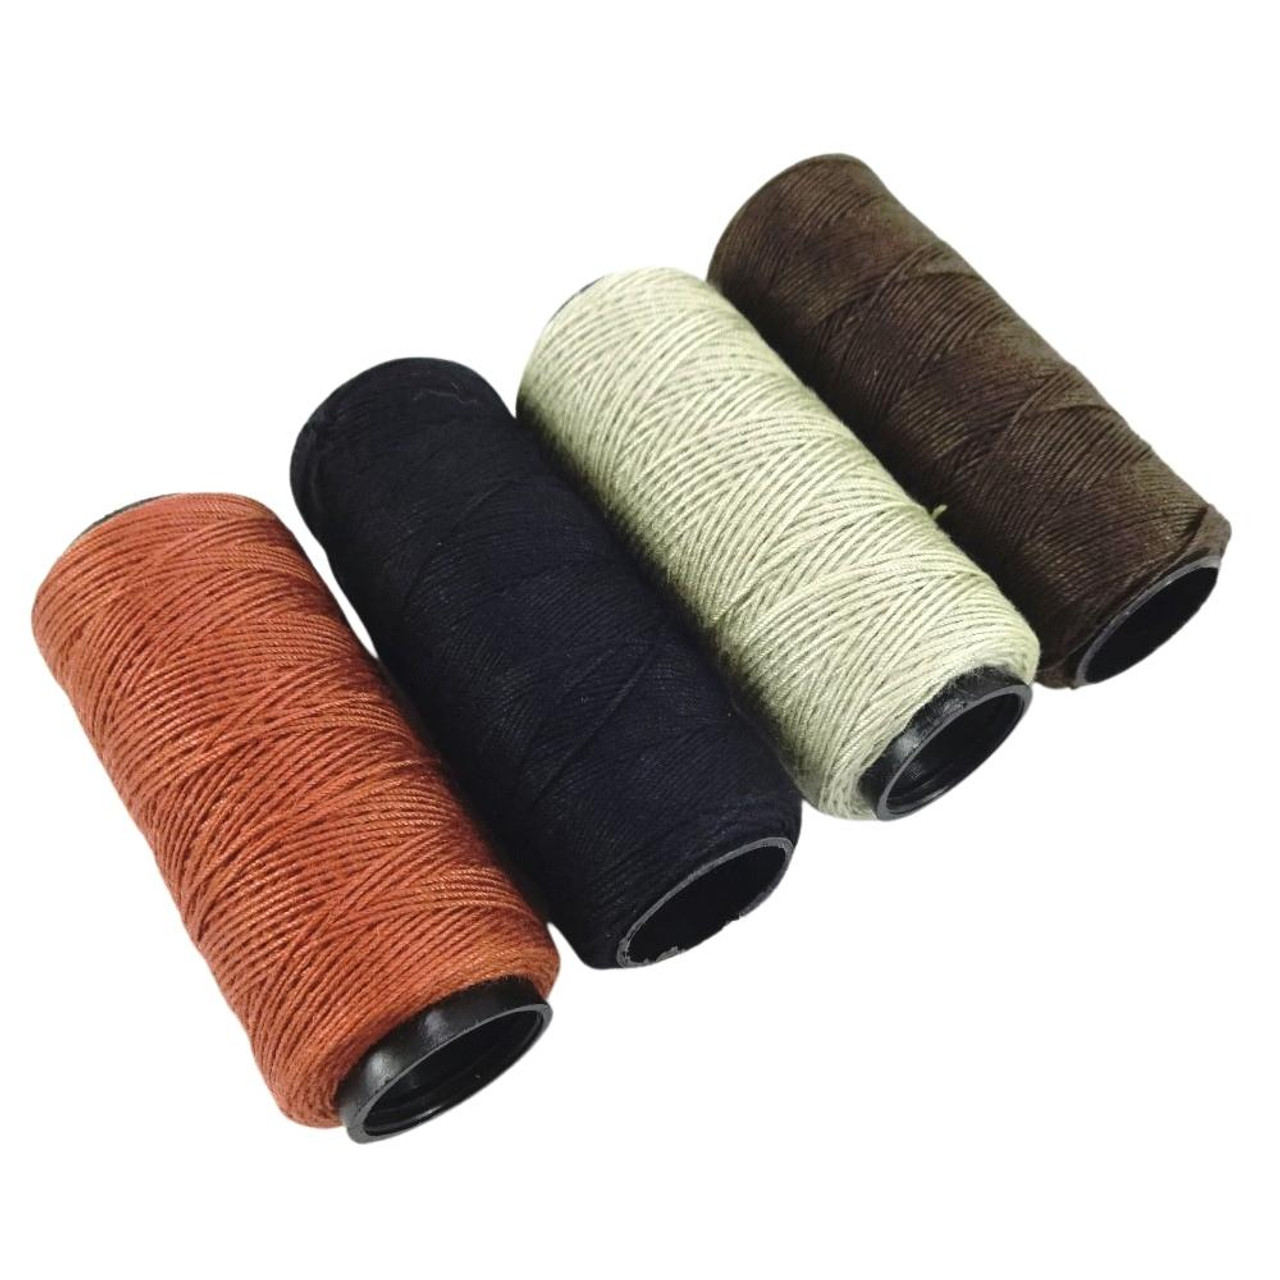 Hair Weaving Threads 3 Rolls/5 Rolls C Curved Needles 4 pcs Sewing Thread  Wig Making Tools